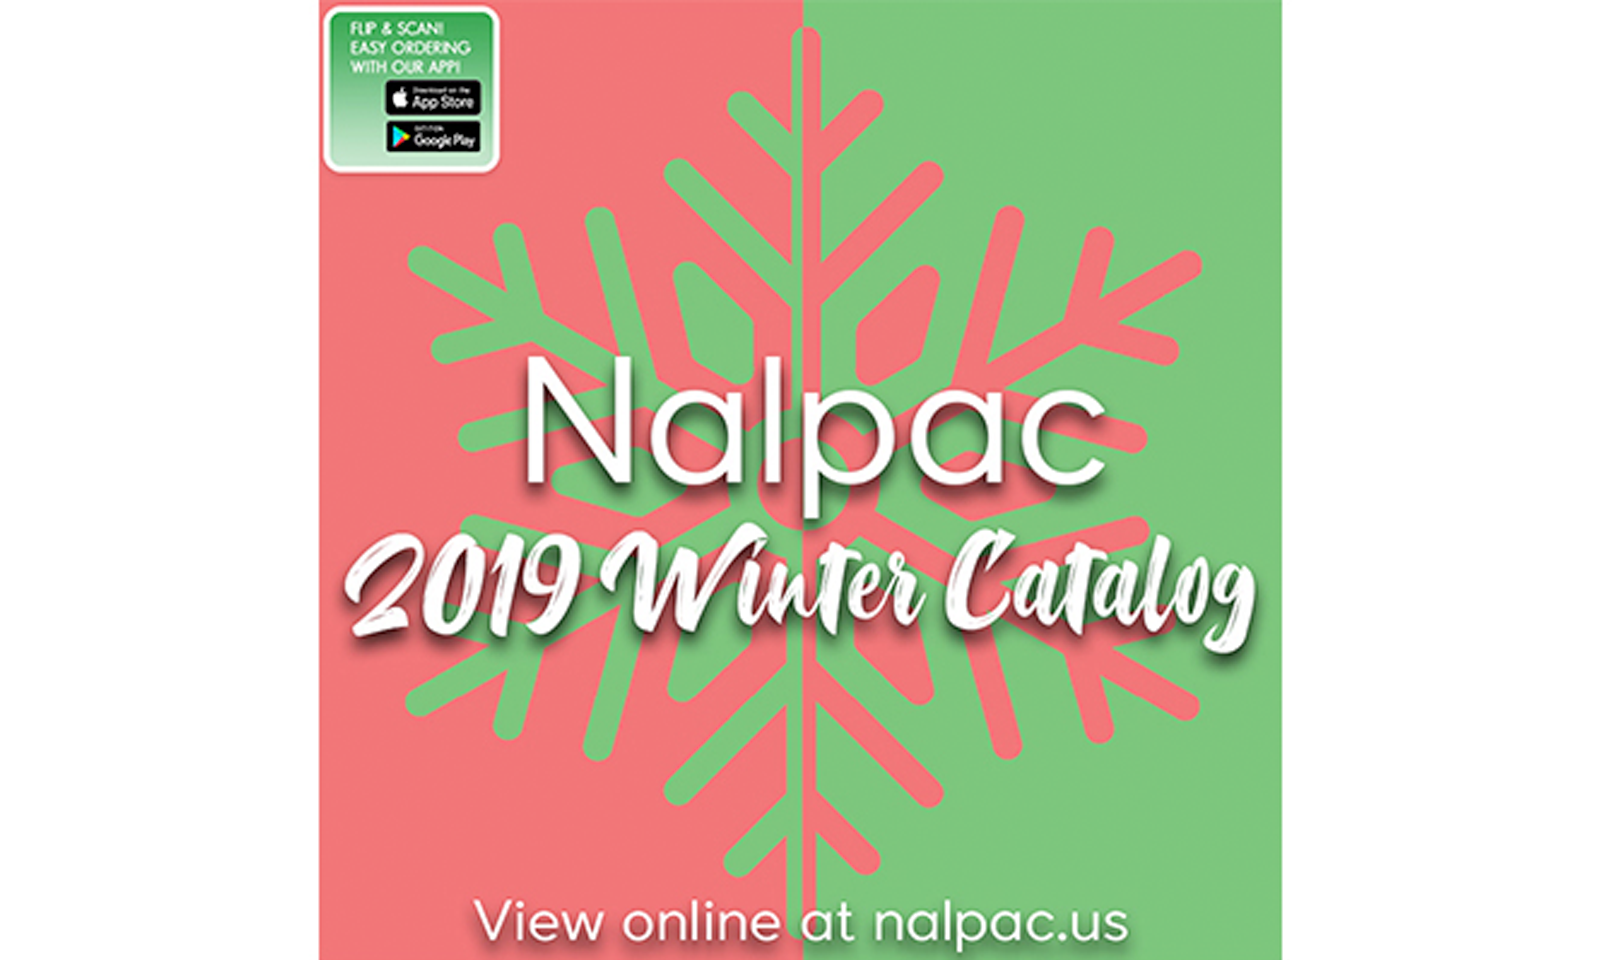 2019 Winter Catalog Out Now From Nalpac